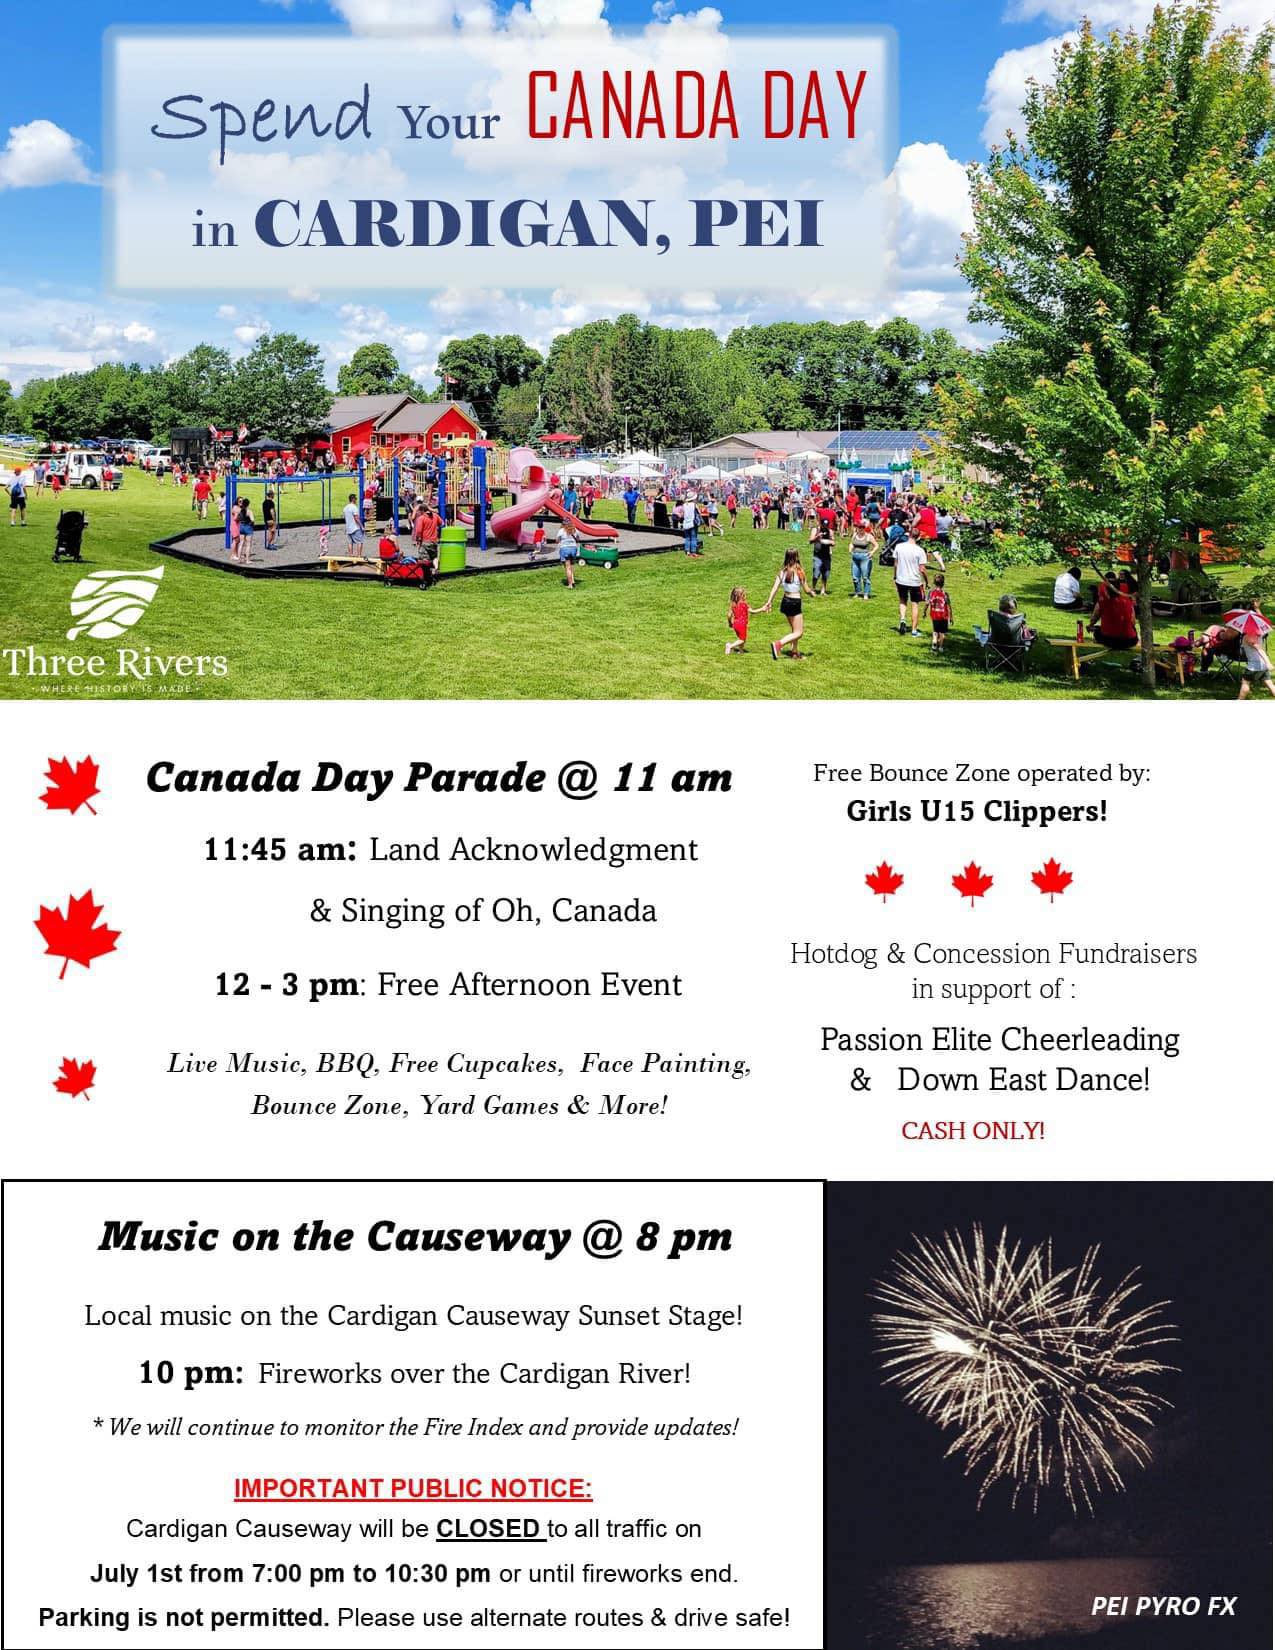 Canada Day events in Cardigan, PEI